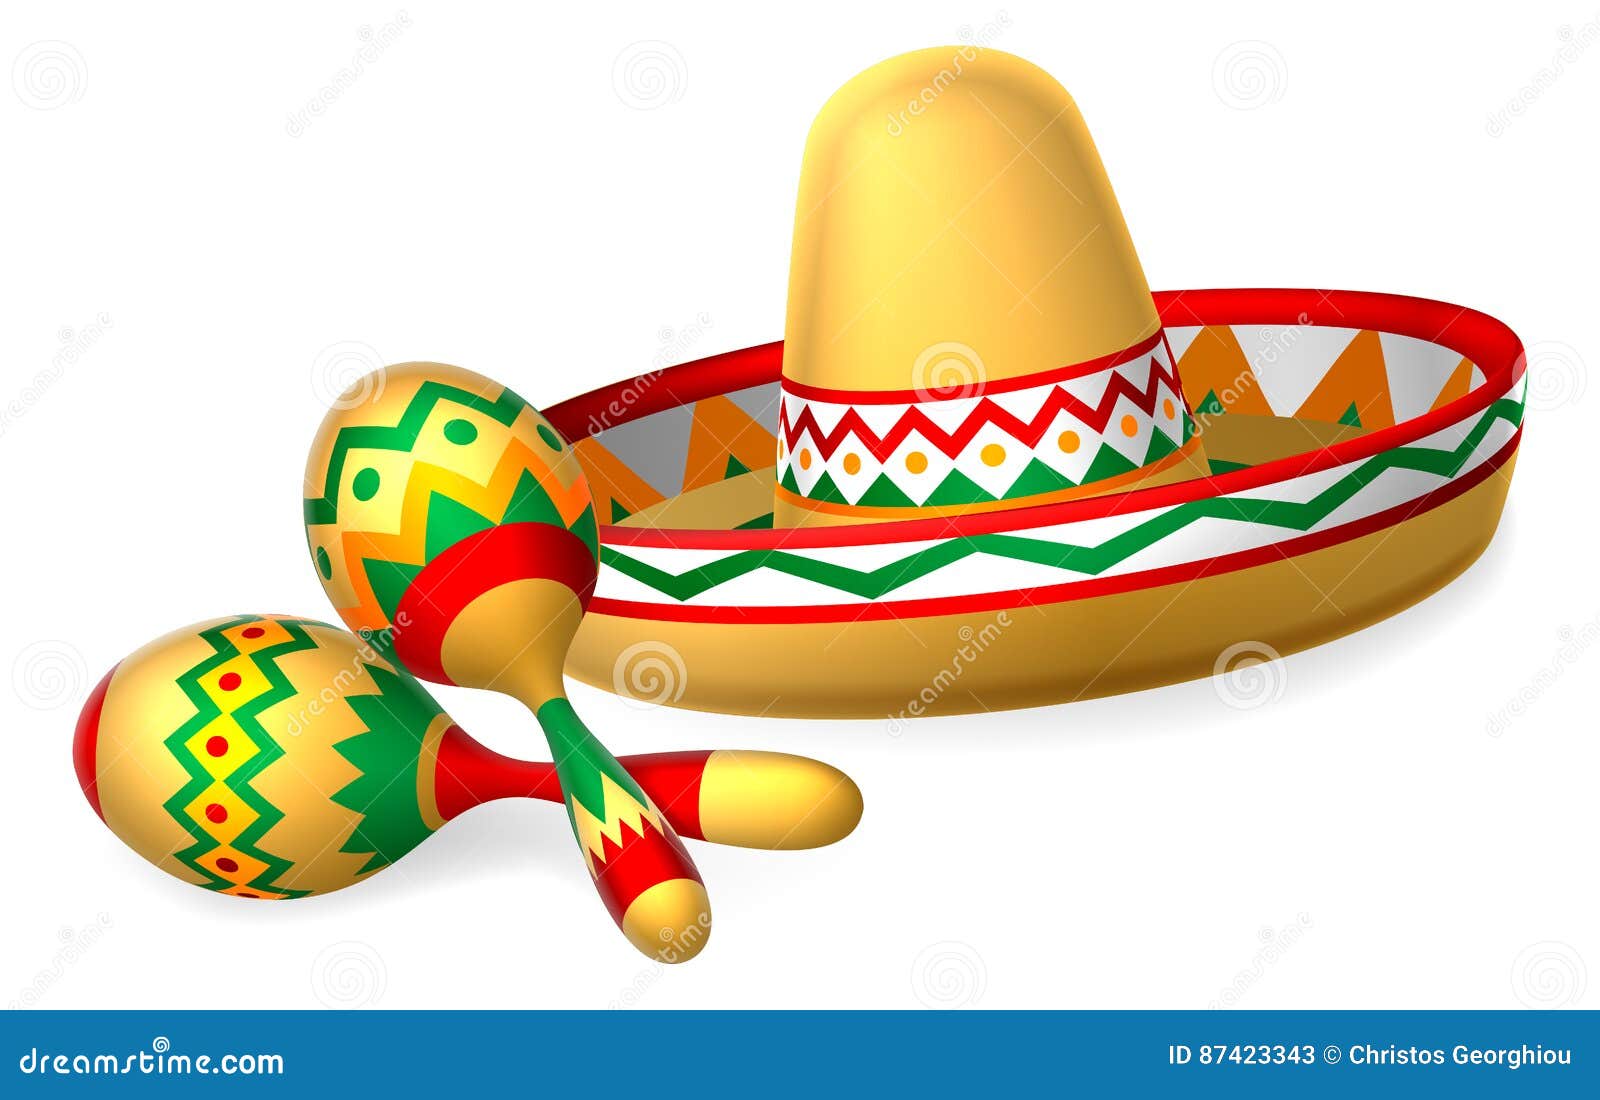 mexican sombrero hat and maracas shakers